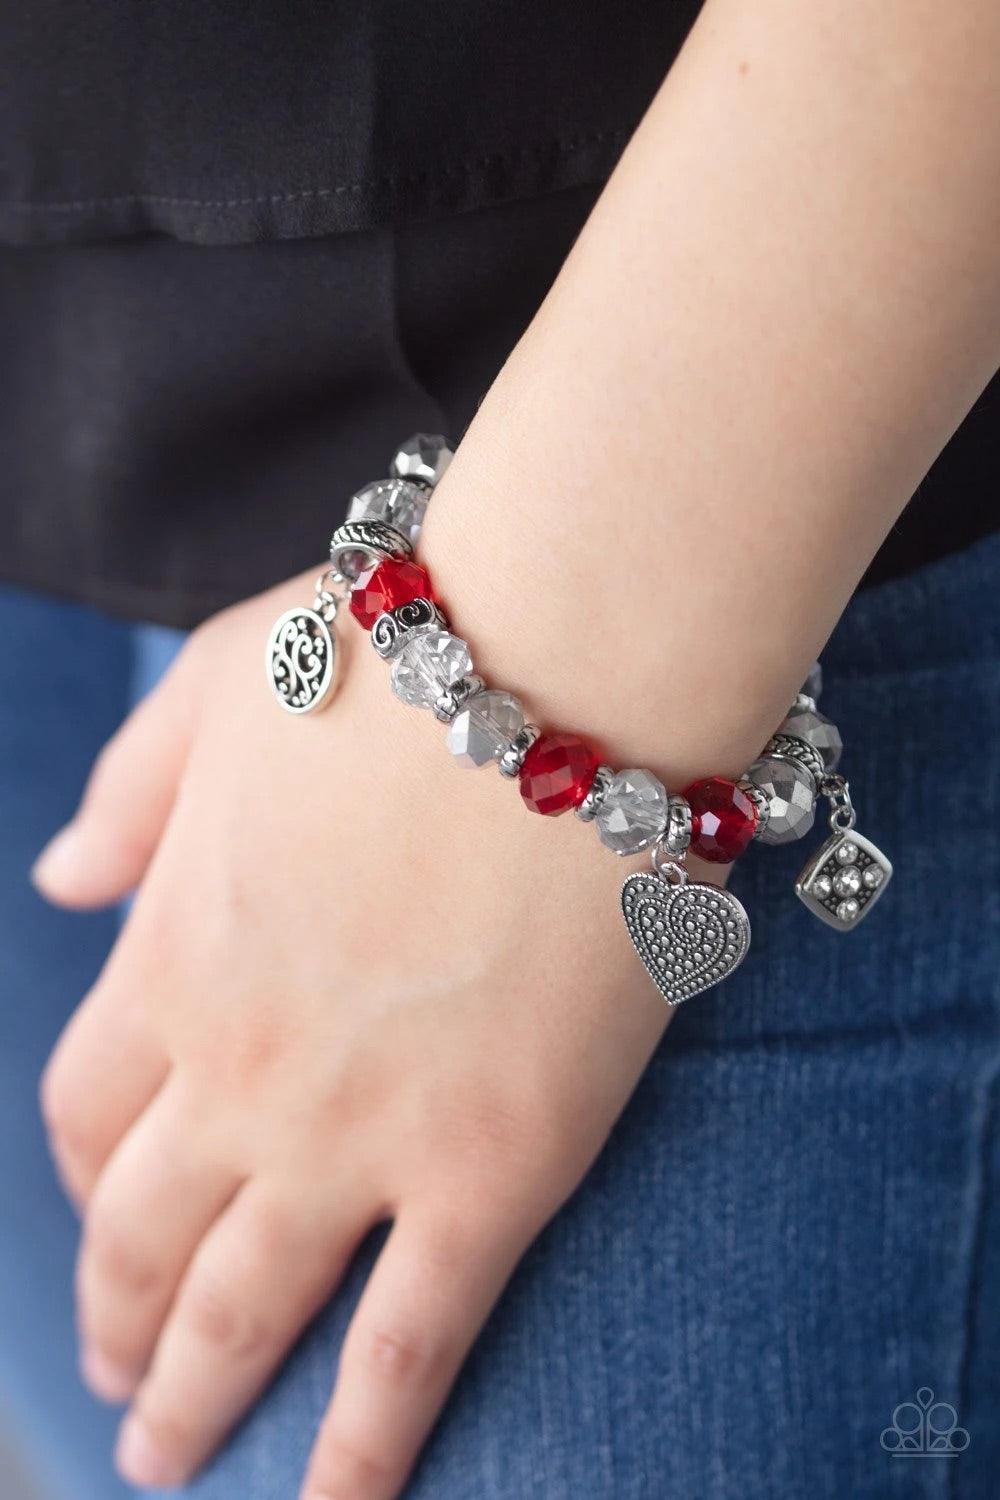 Paparazzi Accessories Fabulously Flirty - Red Dipped in metallic shimmer, smoky crystal-like beads, dainty silver rings, and red crystal-like beads are threaded along a stretchy band around the wrist. Decorative silver heart charms, a white rhinestone enc